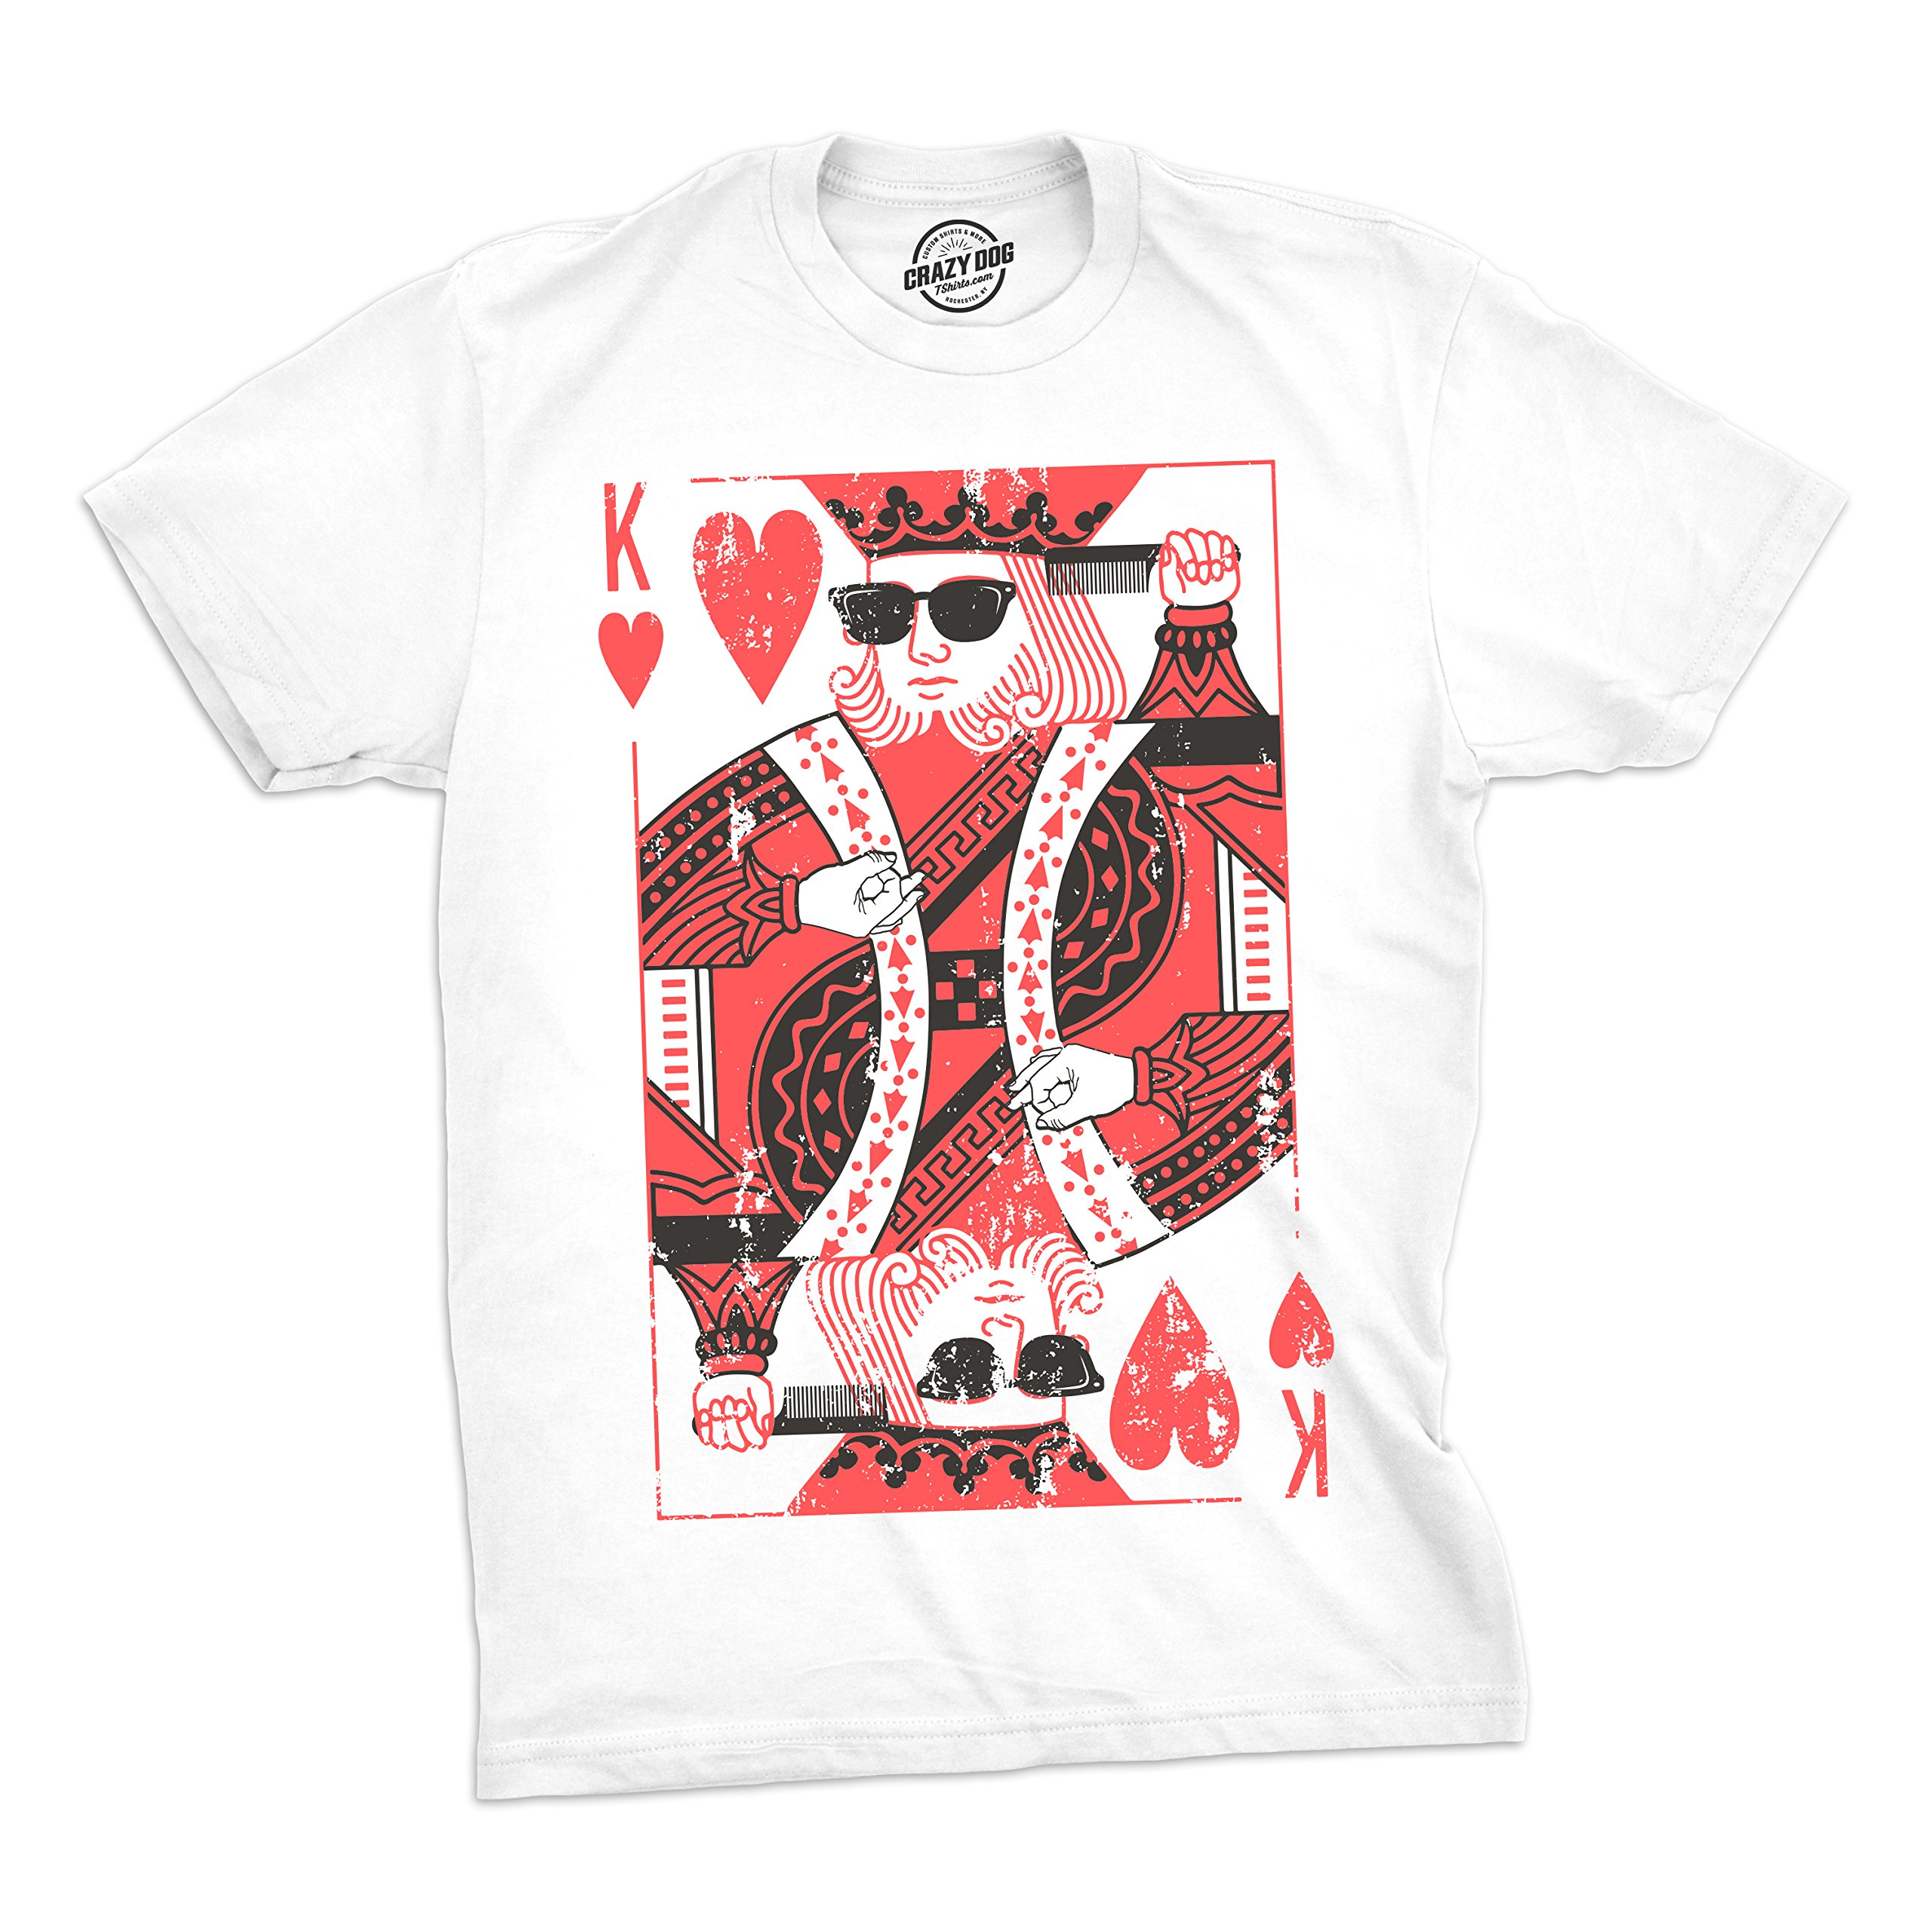 Mens King of Hearts T Shirt Cool Vintage Graphic Novelty Retro Tee for Guys